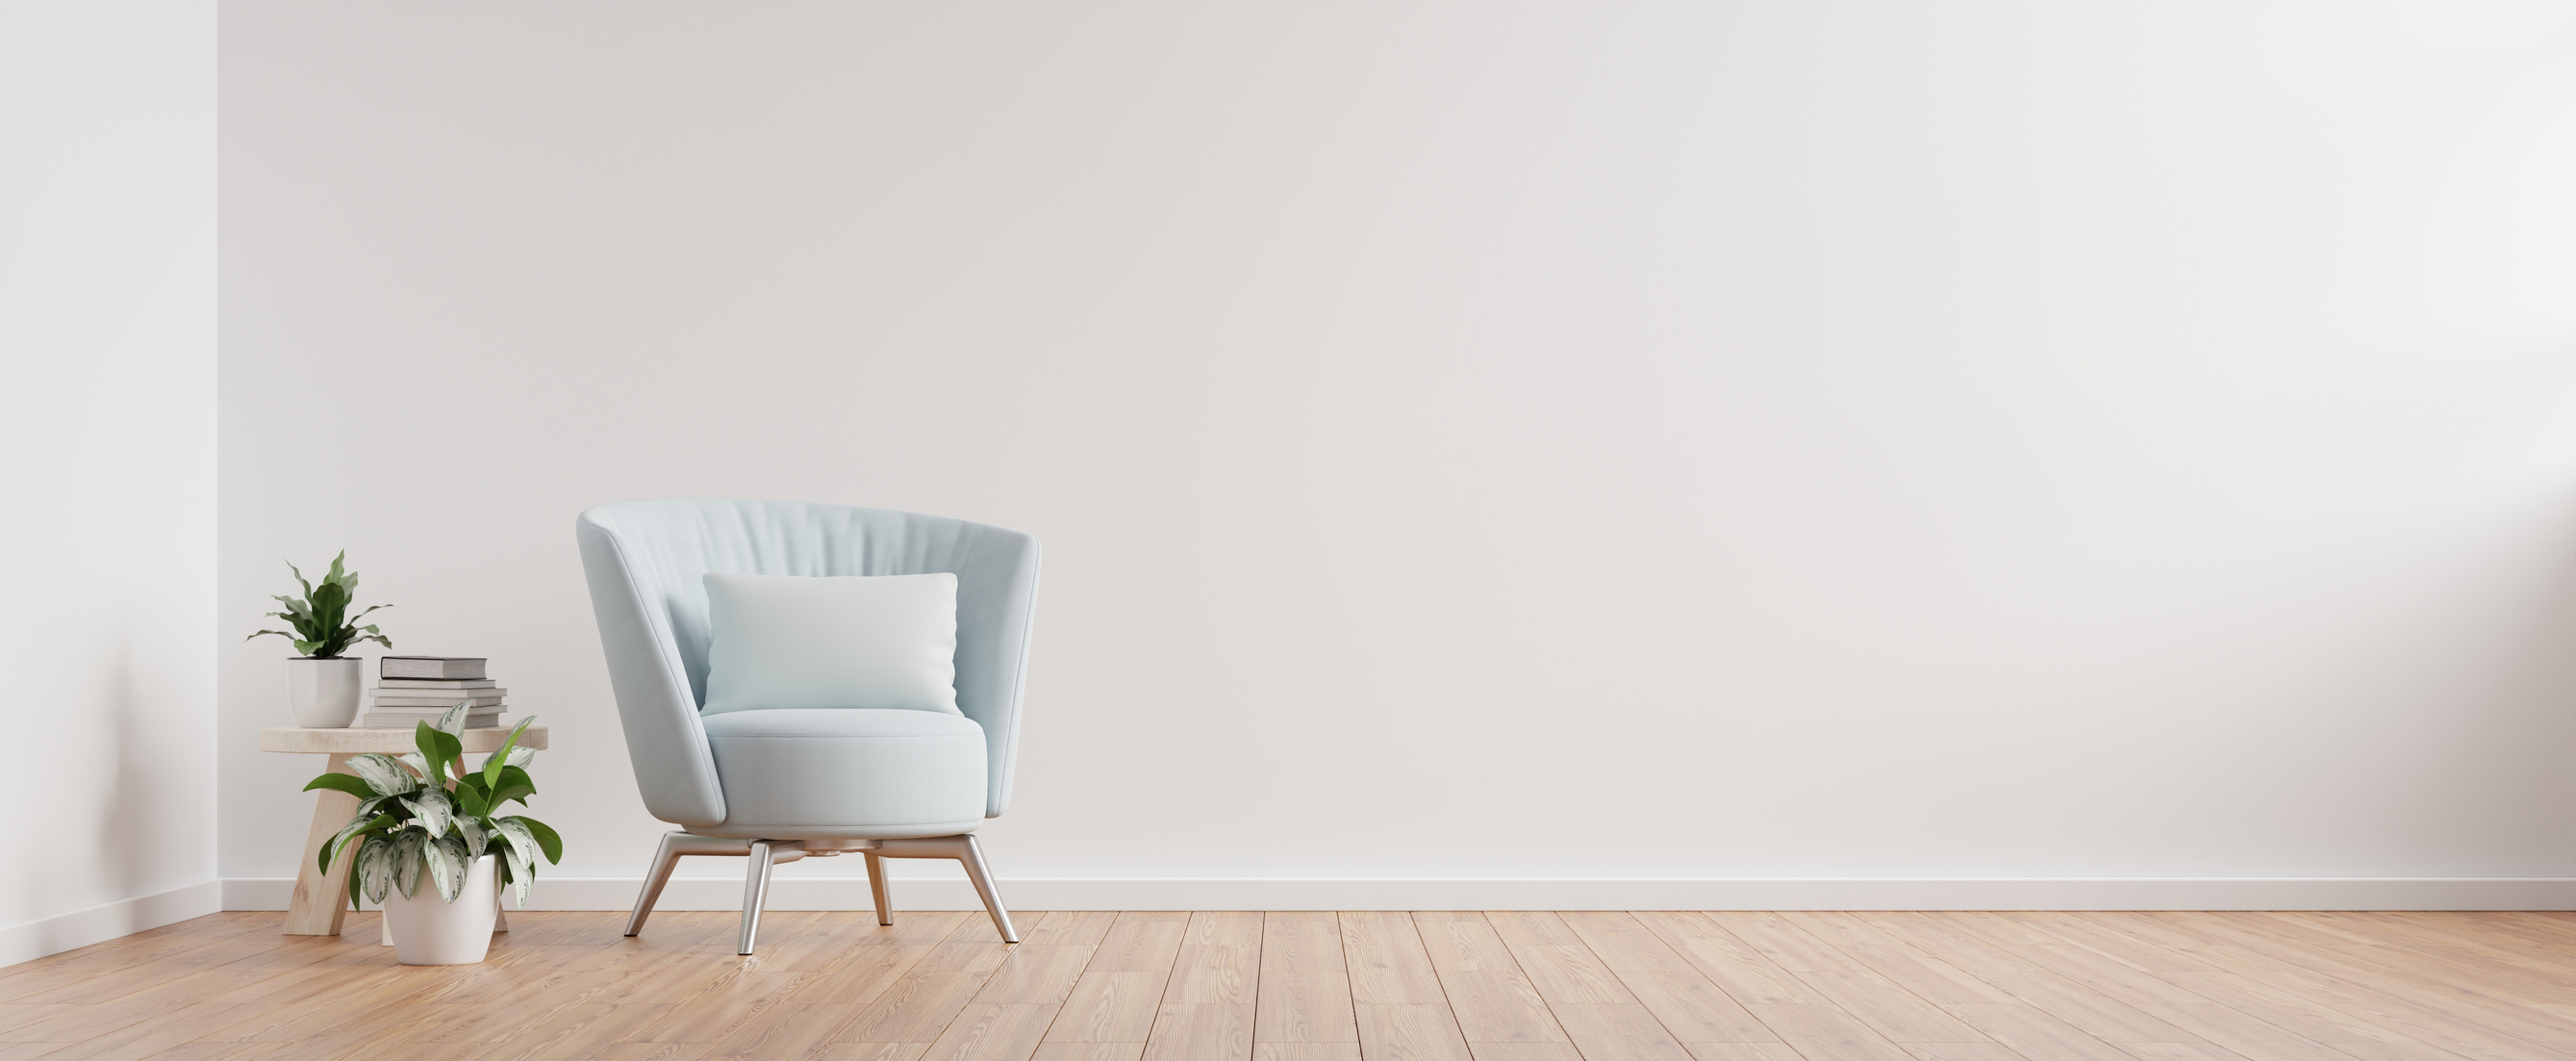 Armchair on Empty White Wall Background